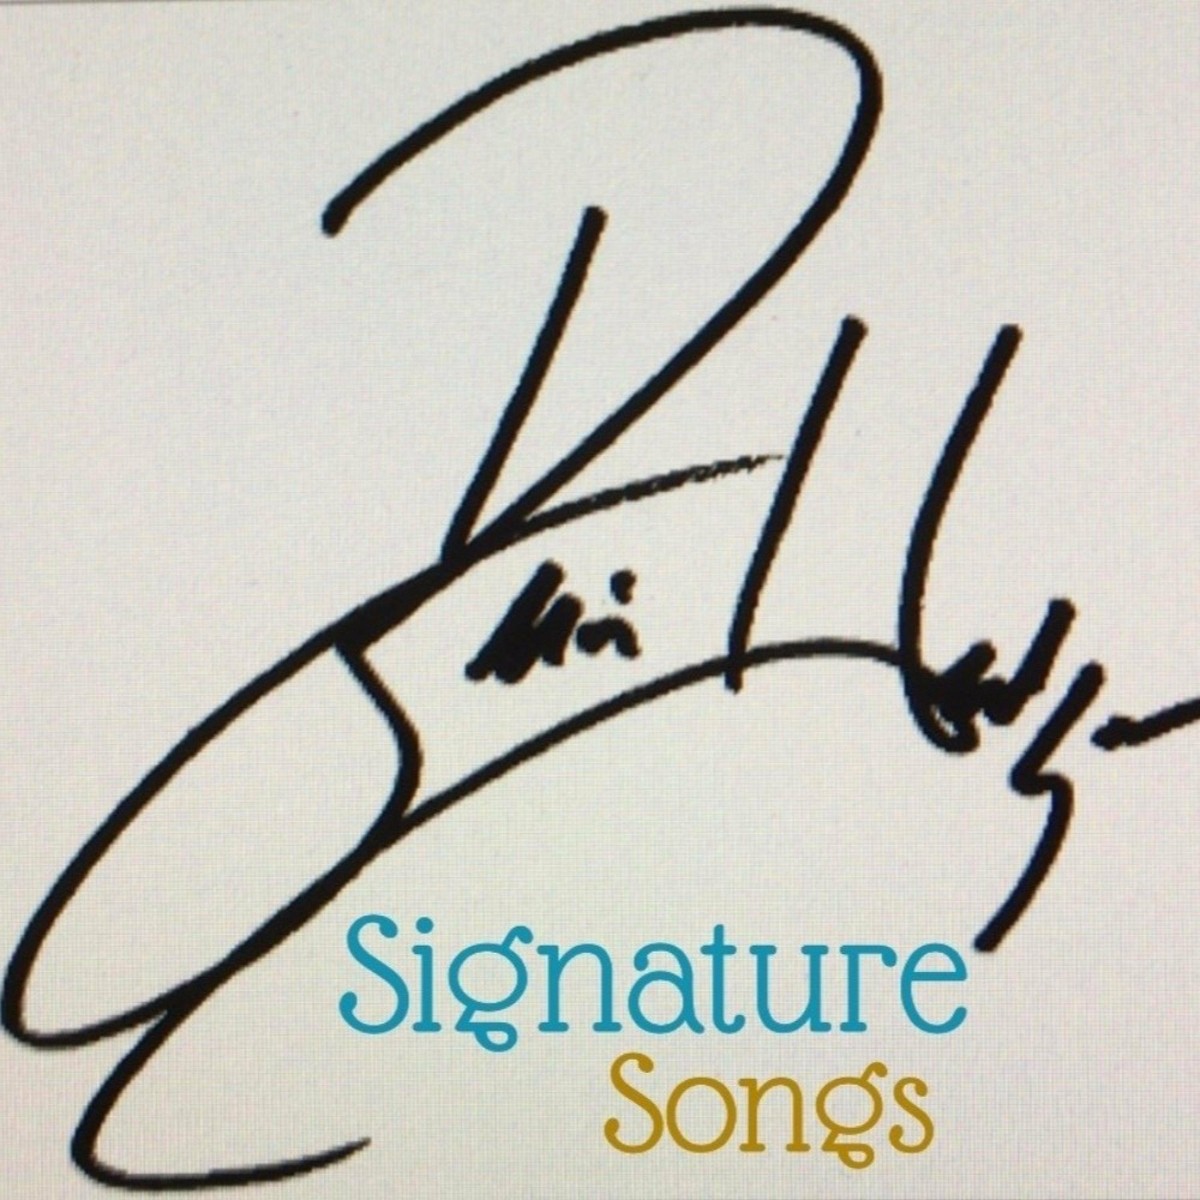 Brian Hedges - Signature Songs